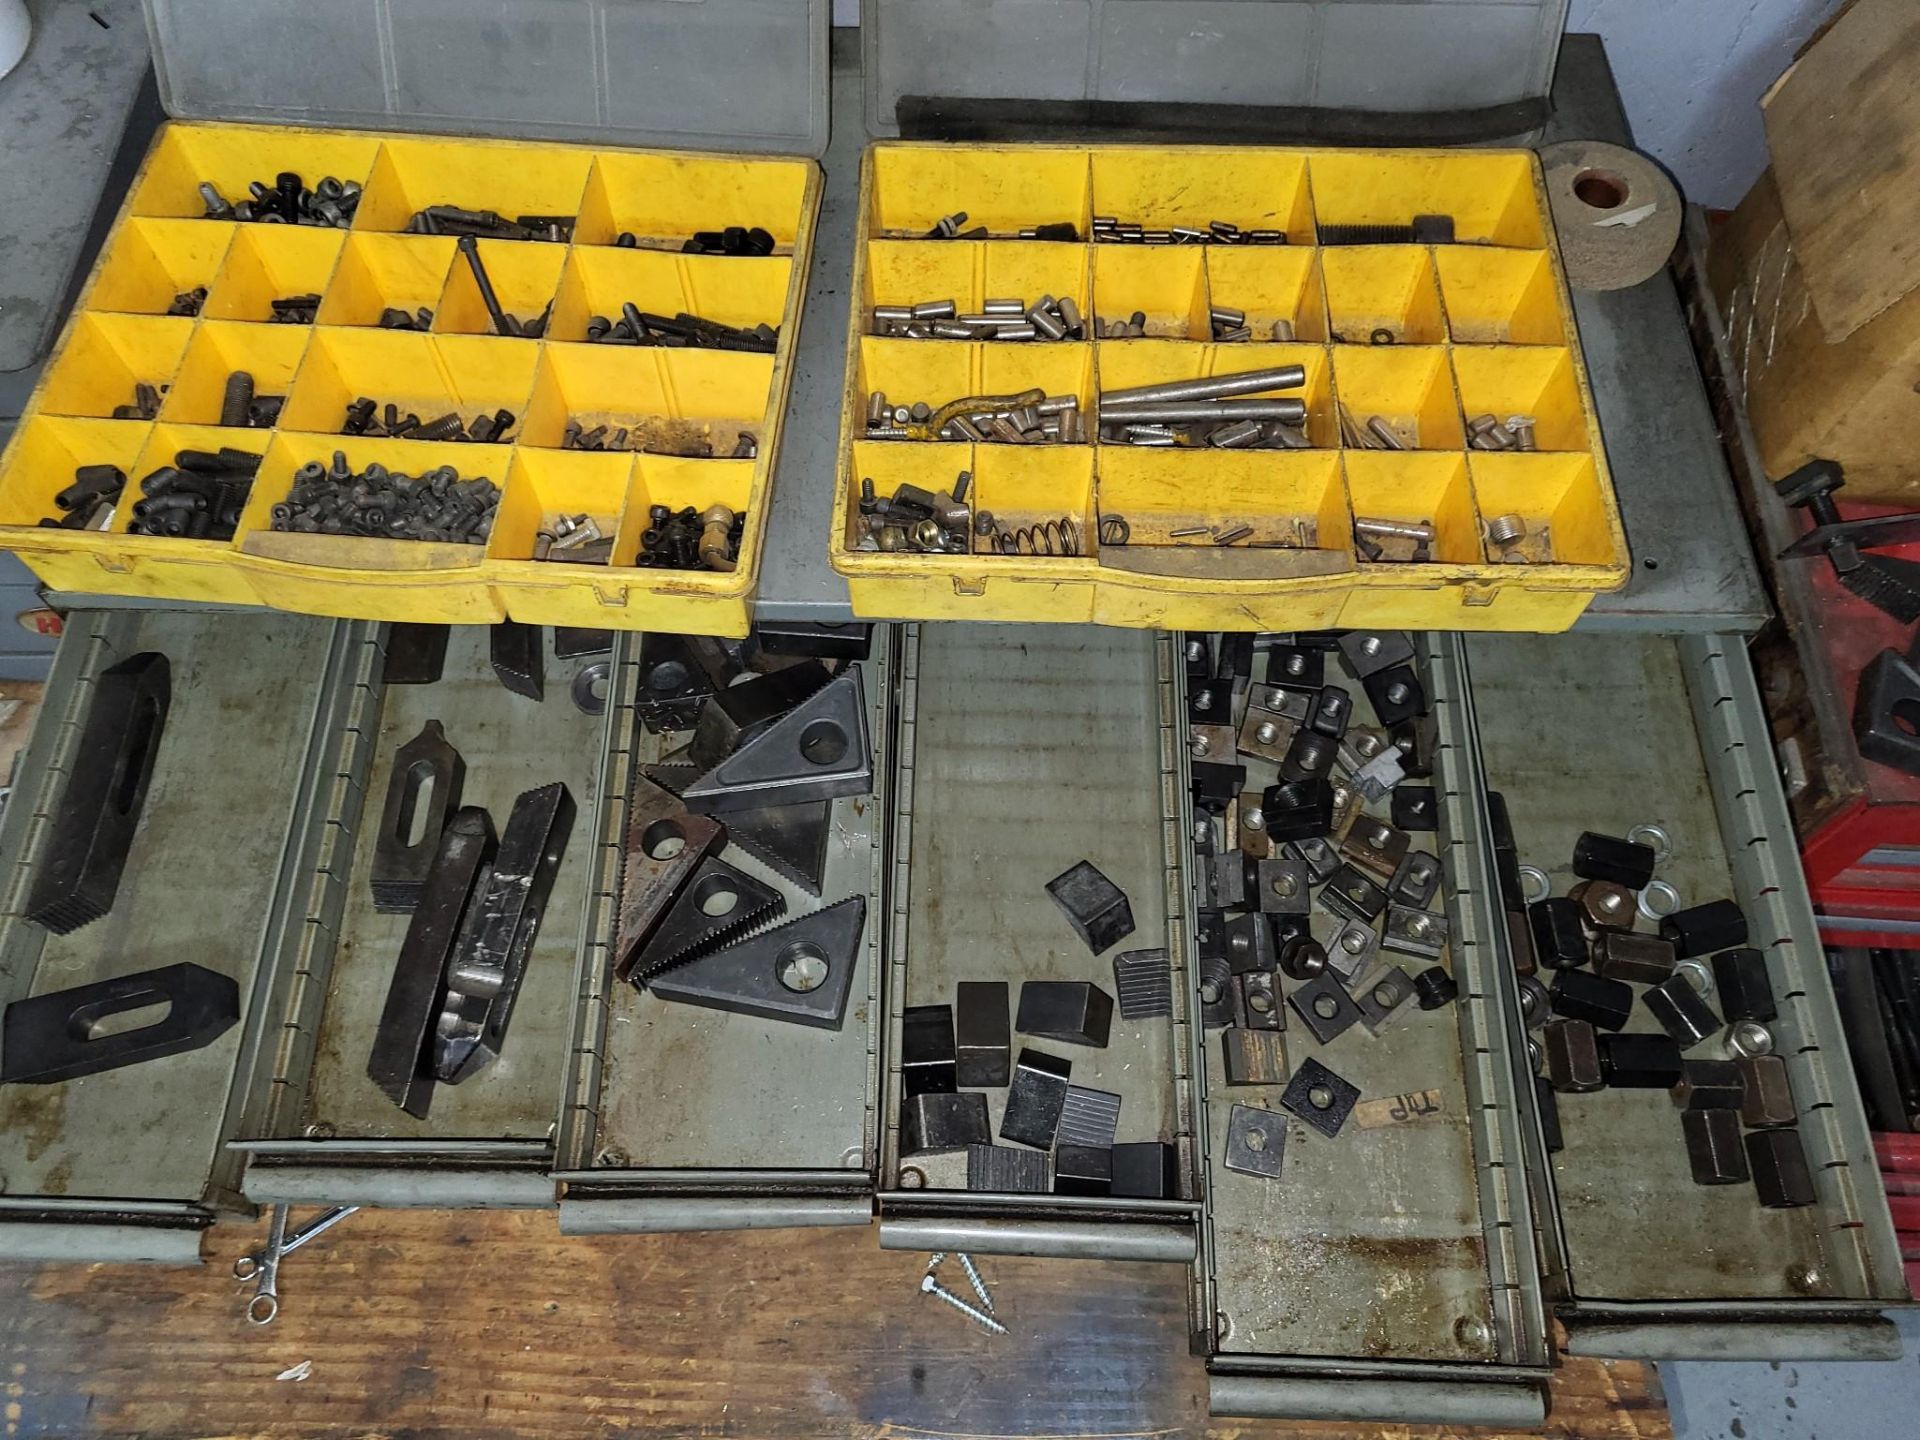 LARGE LOT OF MILLING TOOLS, TAPS, CARBIDE INSERTS, SETUP HARDWARE AND HAND TOOLS - Image 22 of 24